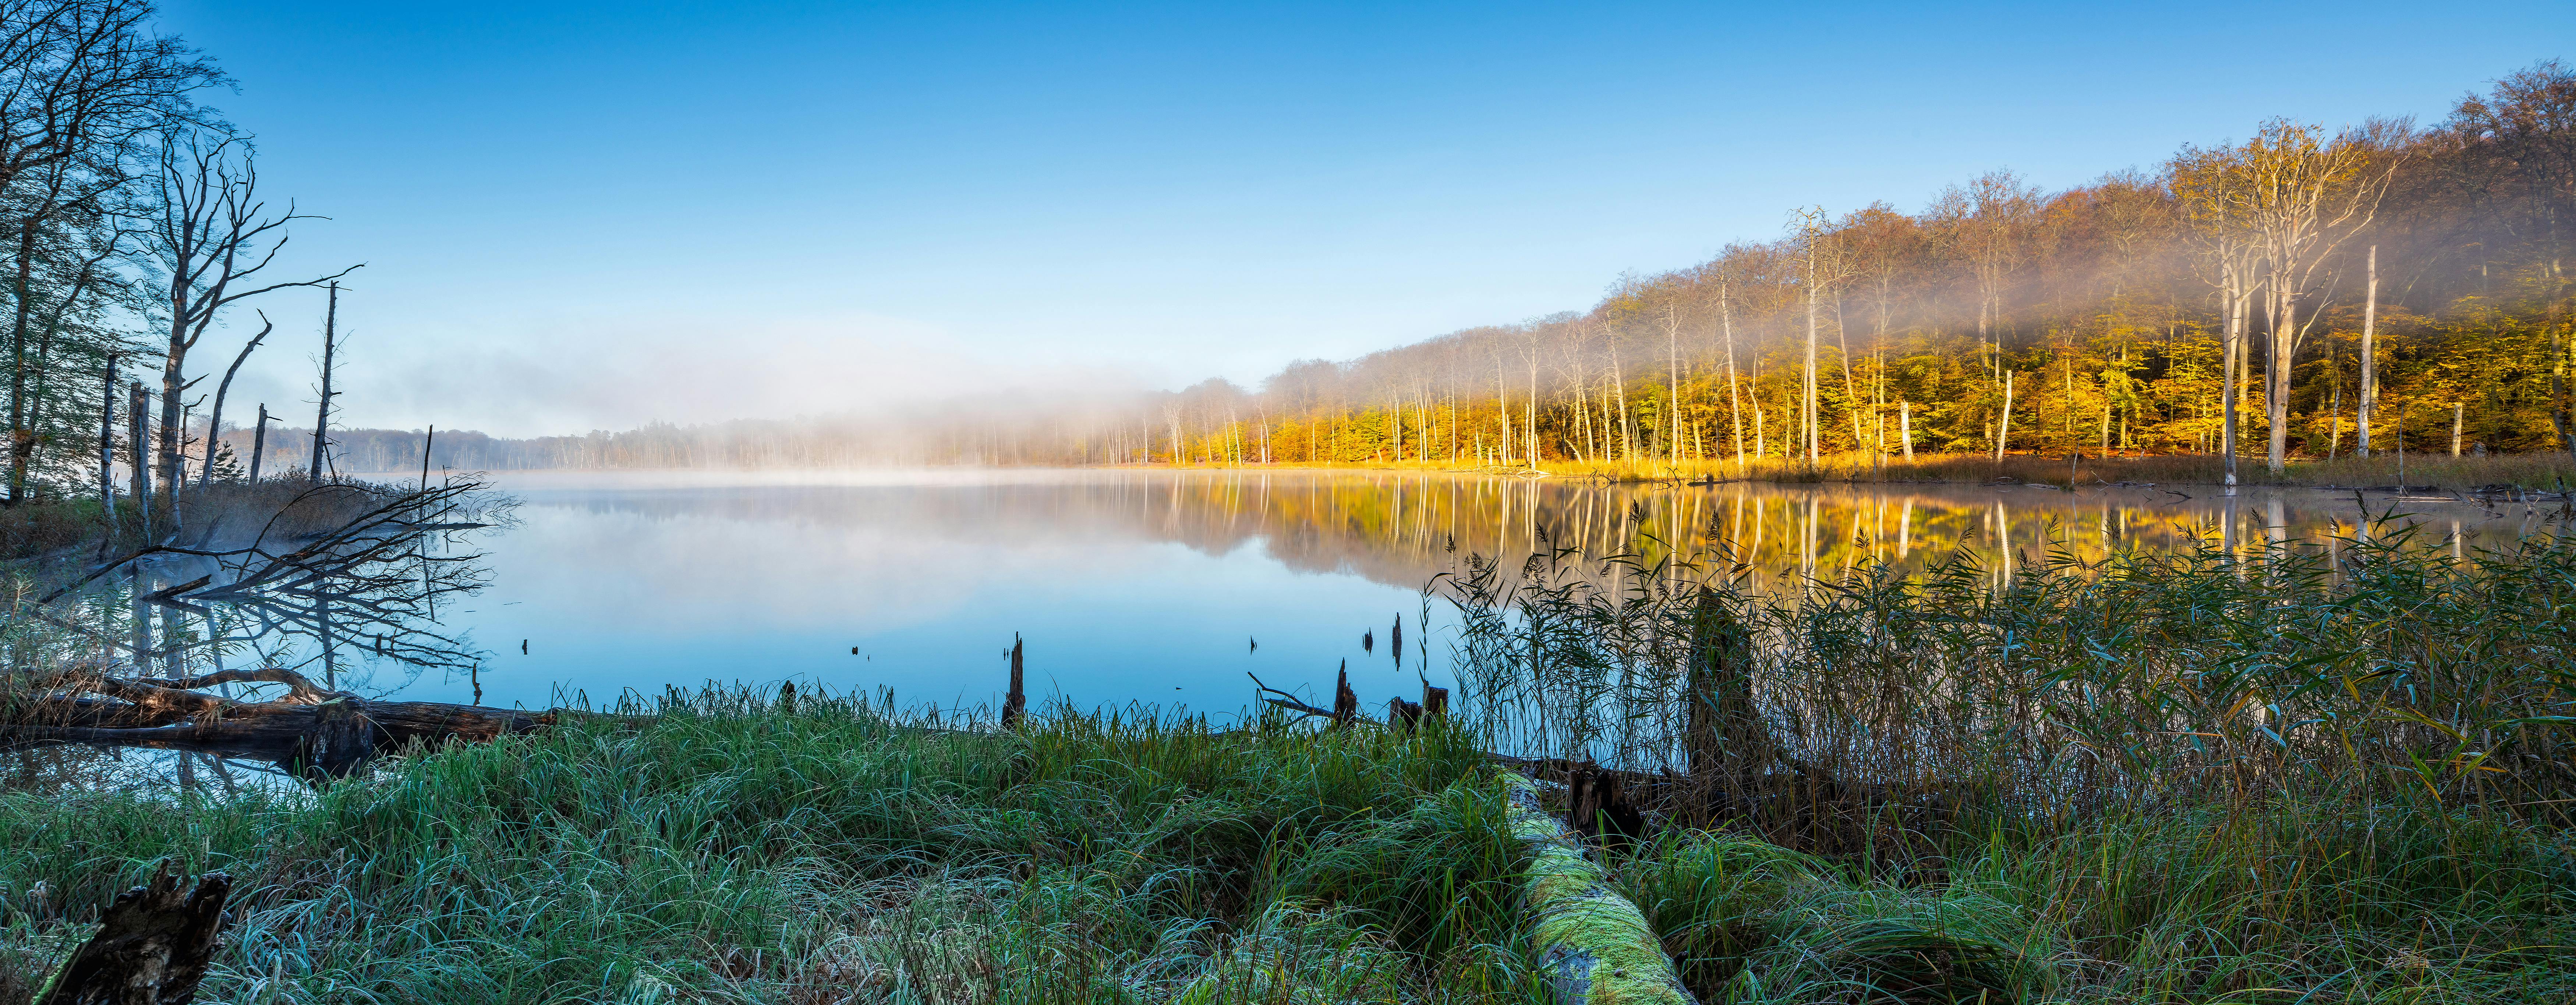 Small Calm lake with morning fog under blue sky in Autumn, Muritz National Park, Germany